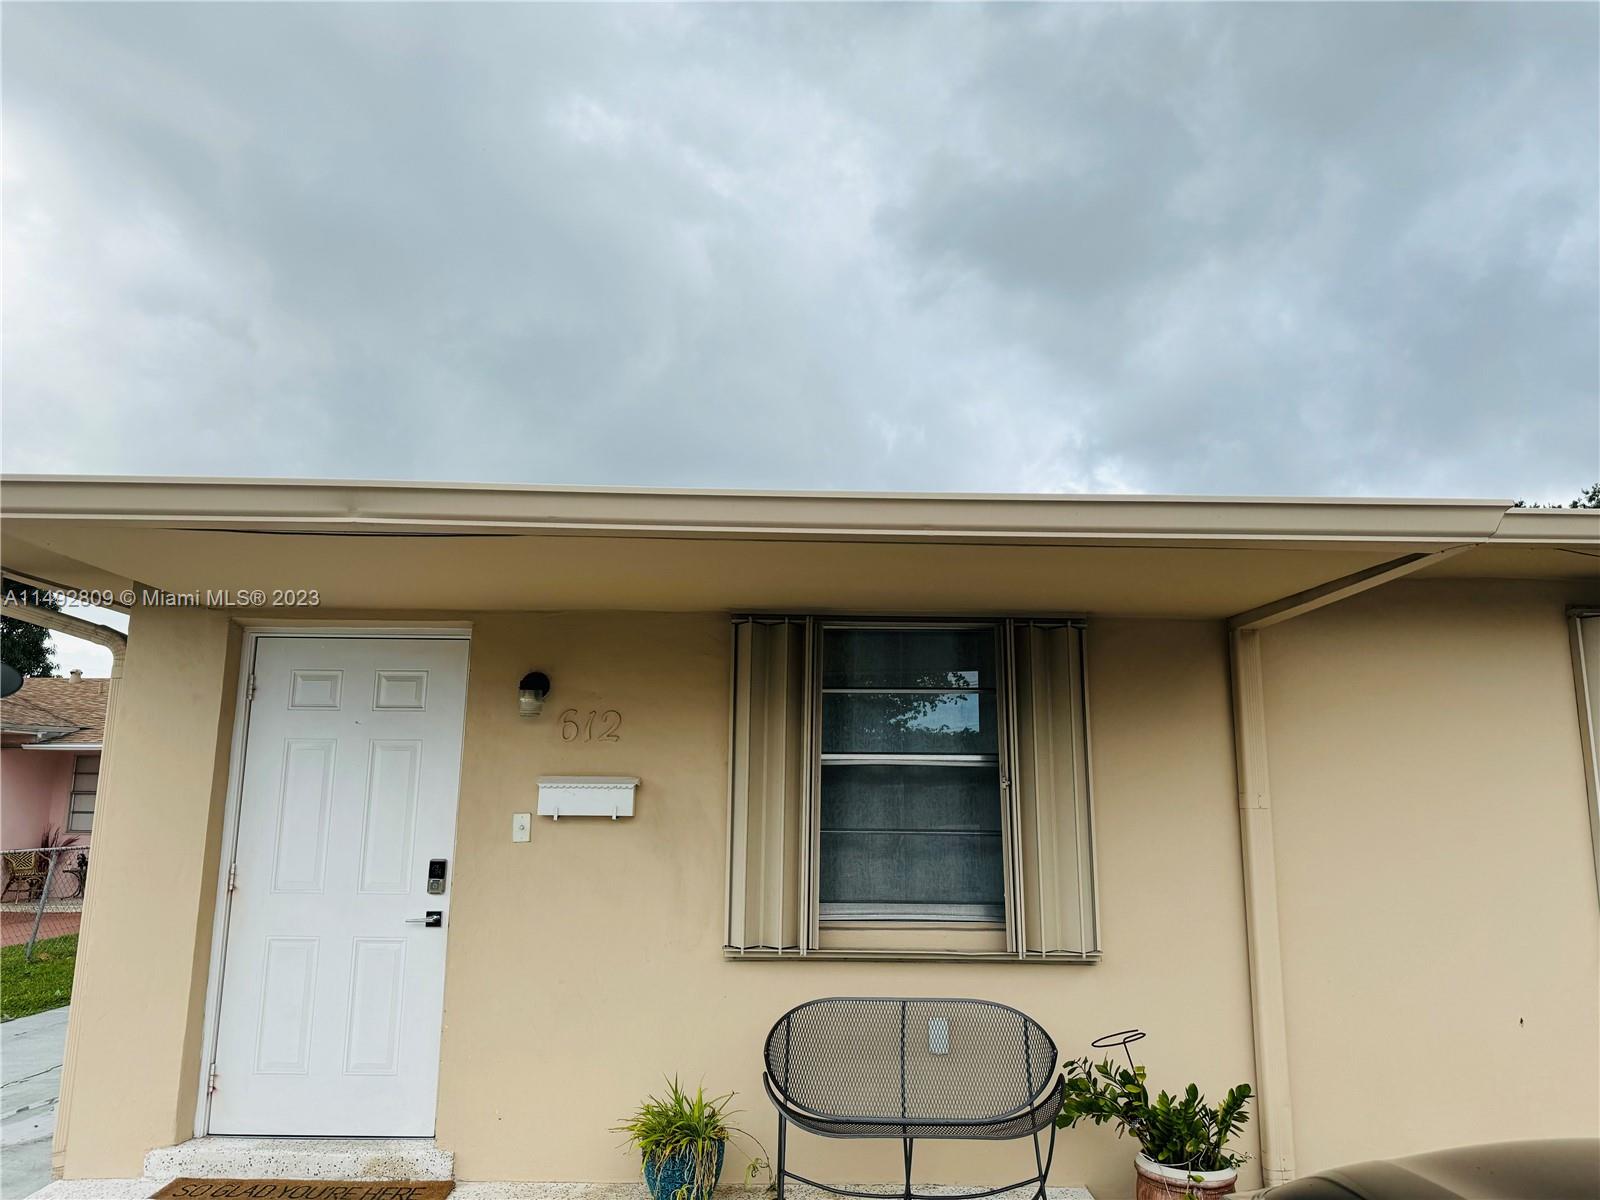 612 NW 43rd 612, Miami, Florida 33126, 3 Bedrooms Bedrooms, ,2 BathroomsBathrooms,Residentiallease,For Rent,612 NW 43rd 612,A11492809